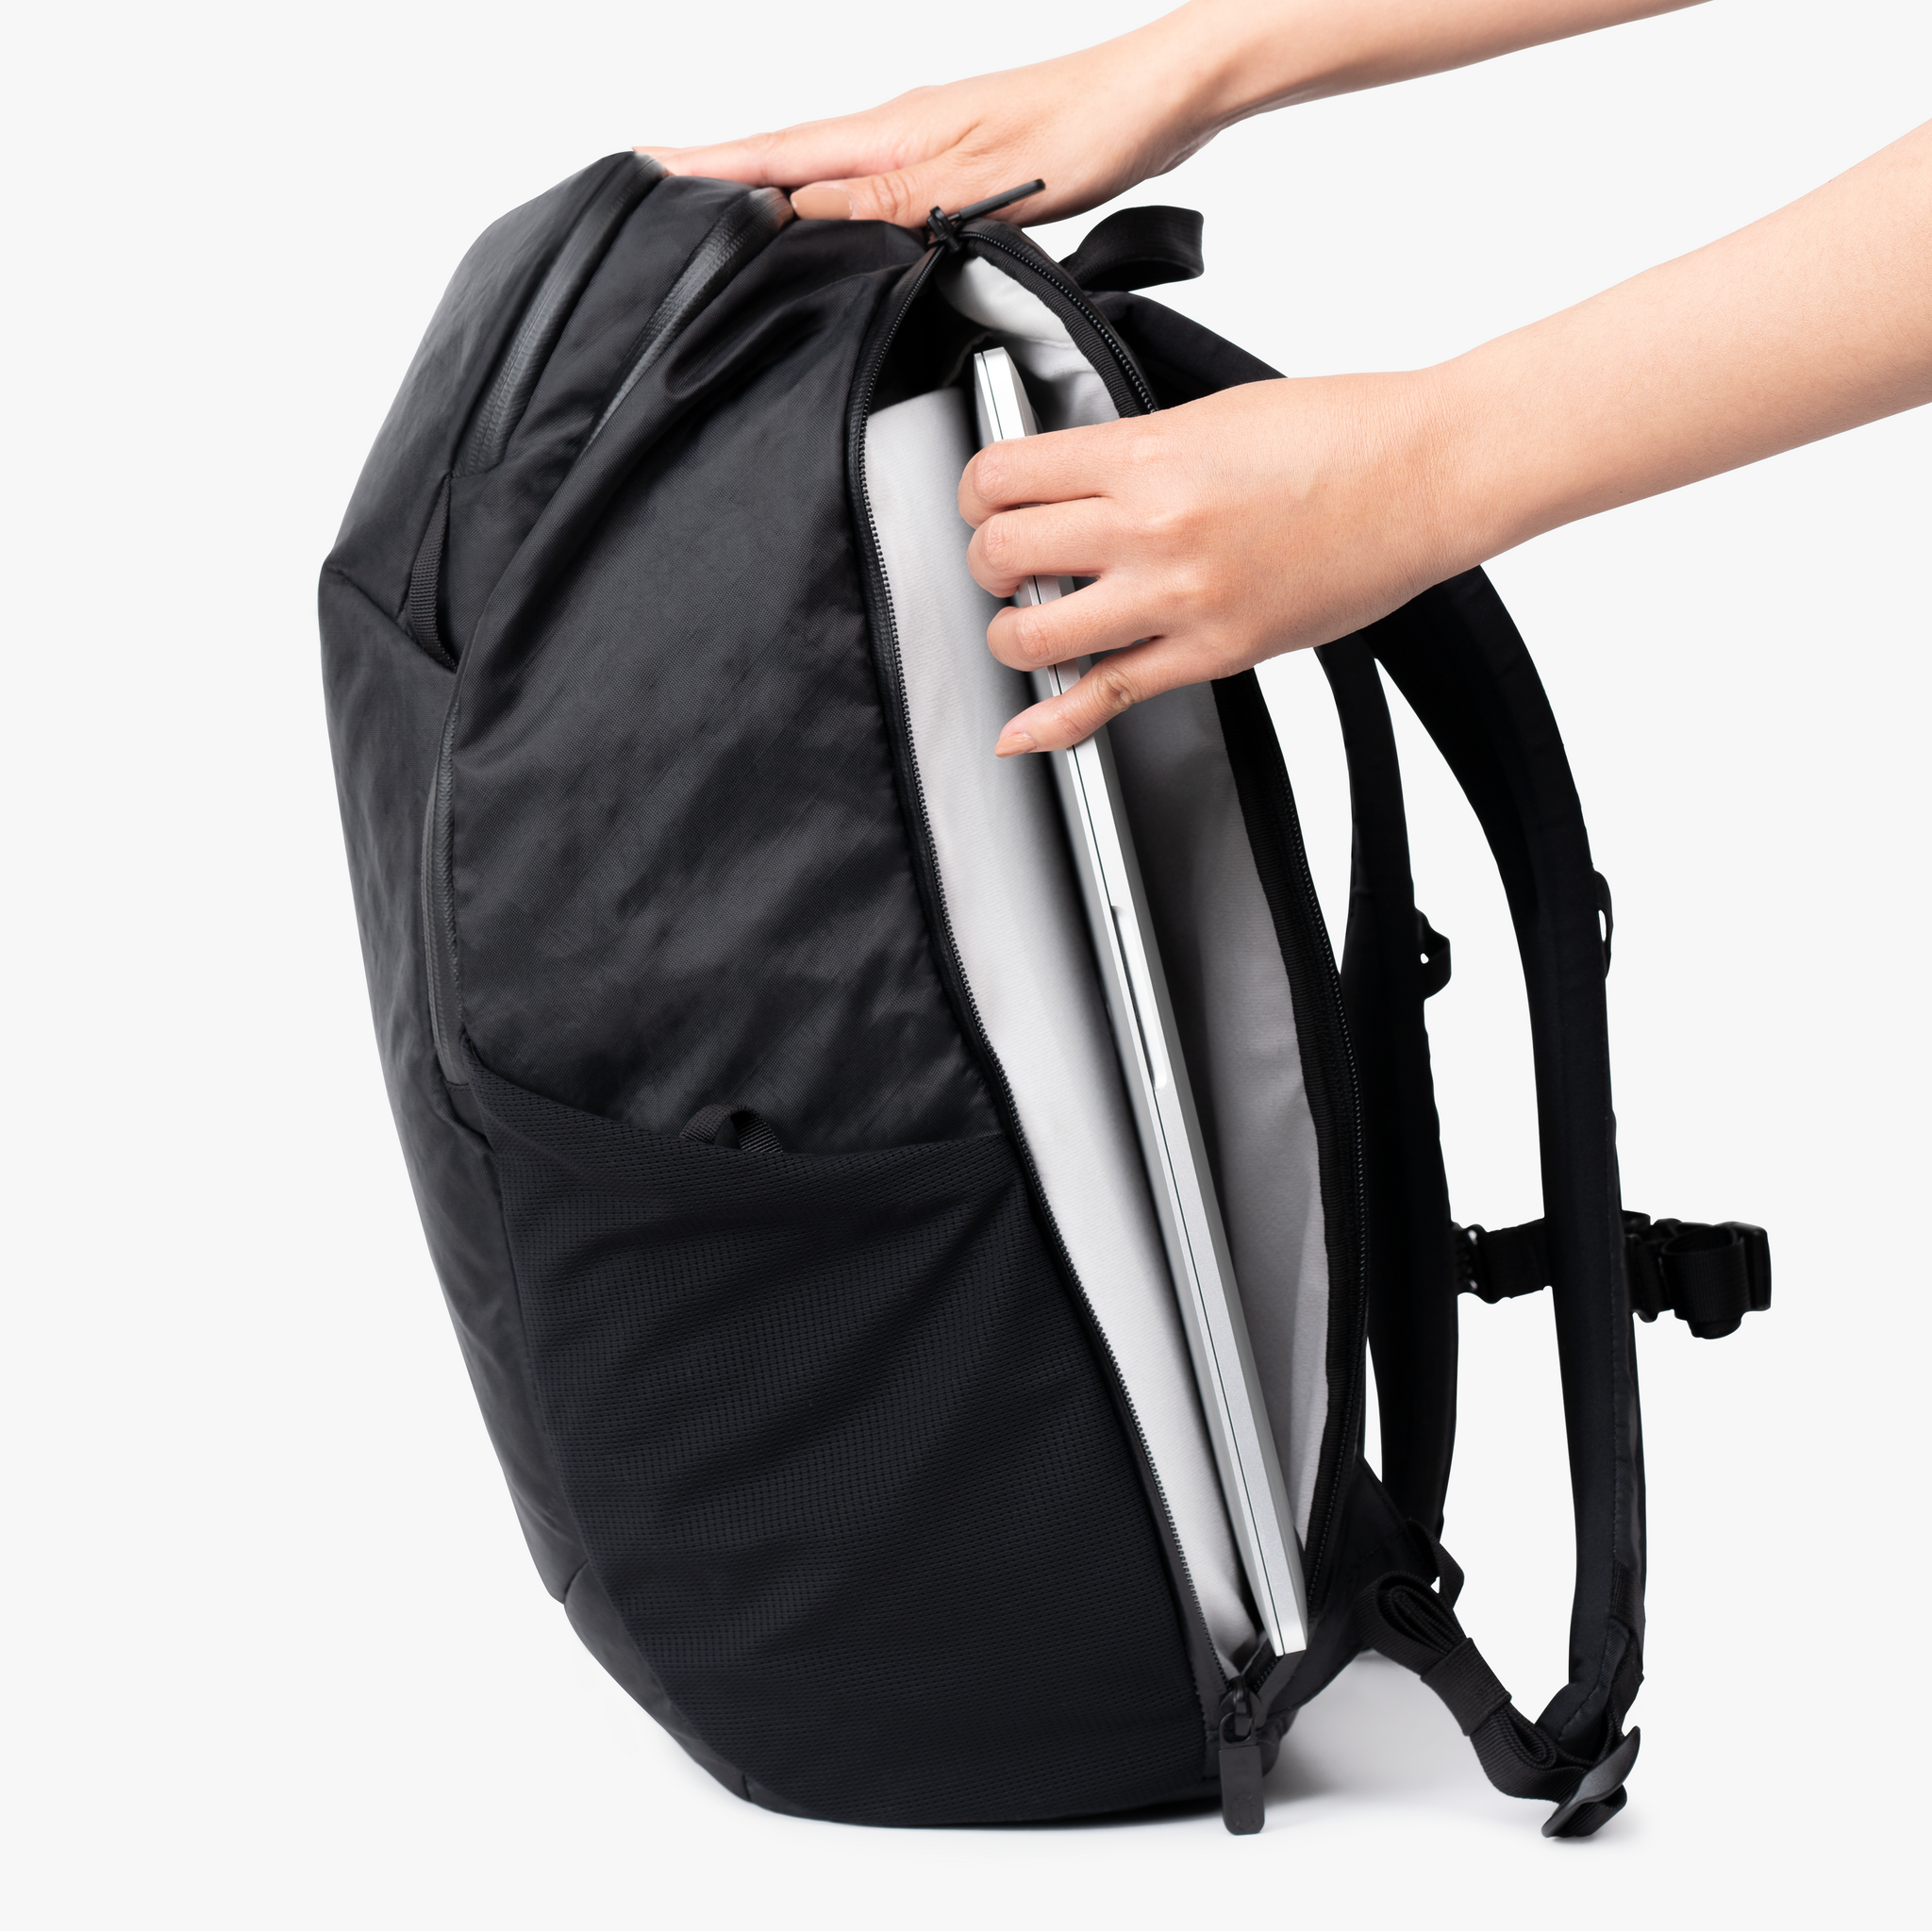 main compartment opens almost the entire width of the backpack